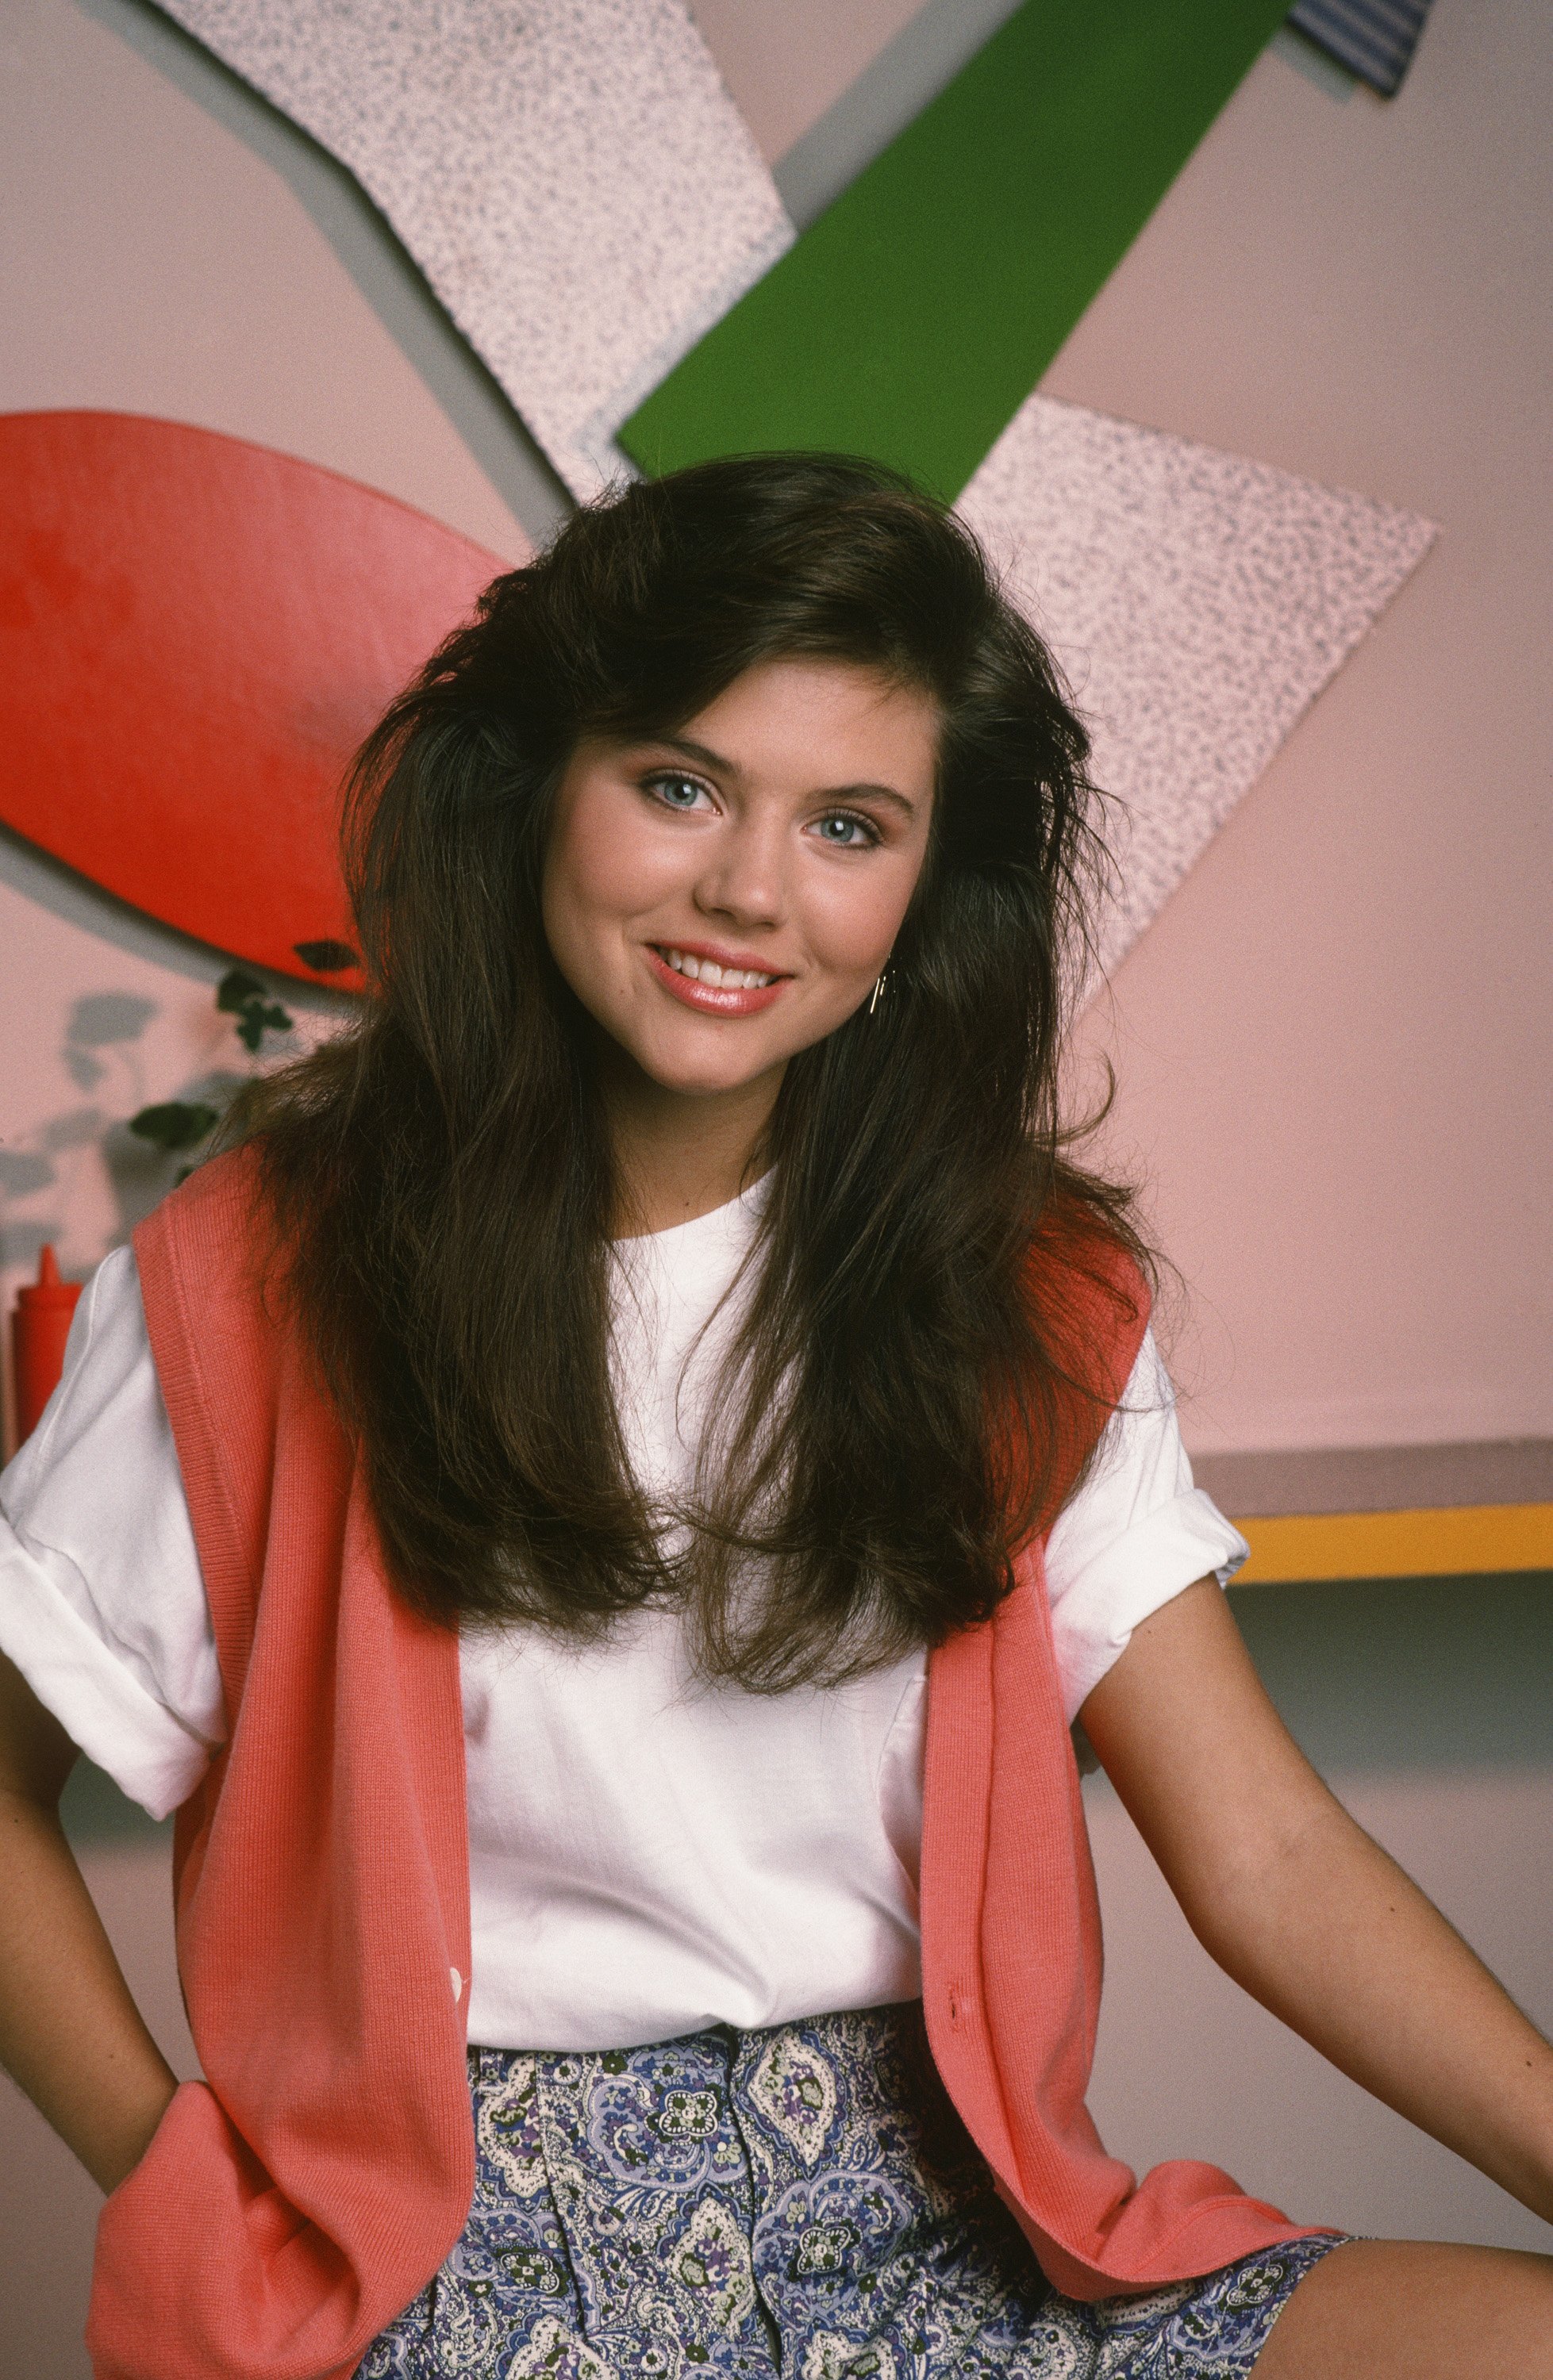 An undated image of Tiffani Thiessen on the set of "Saved by the Bell" | Source: Getty Images